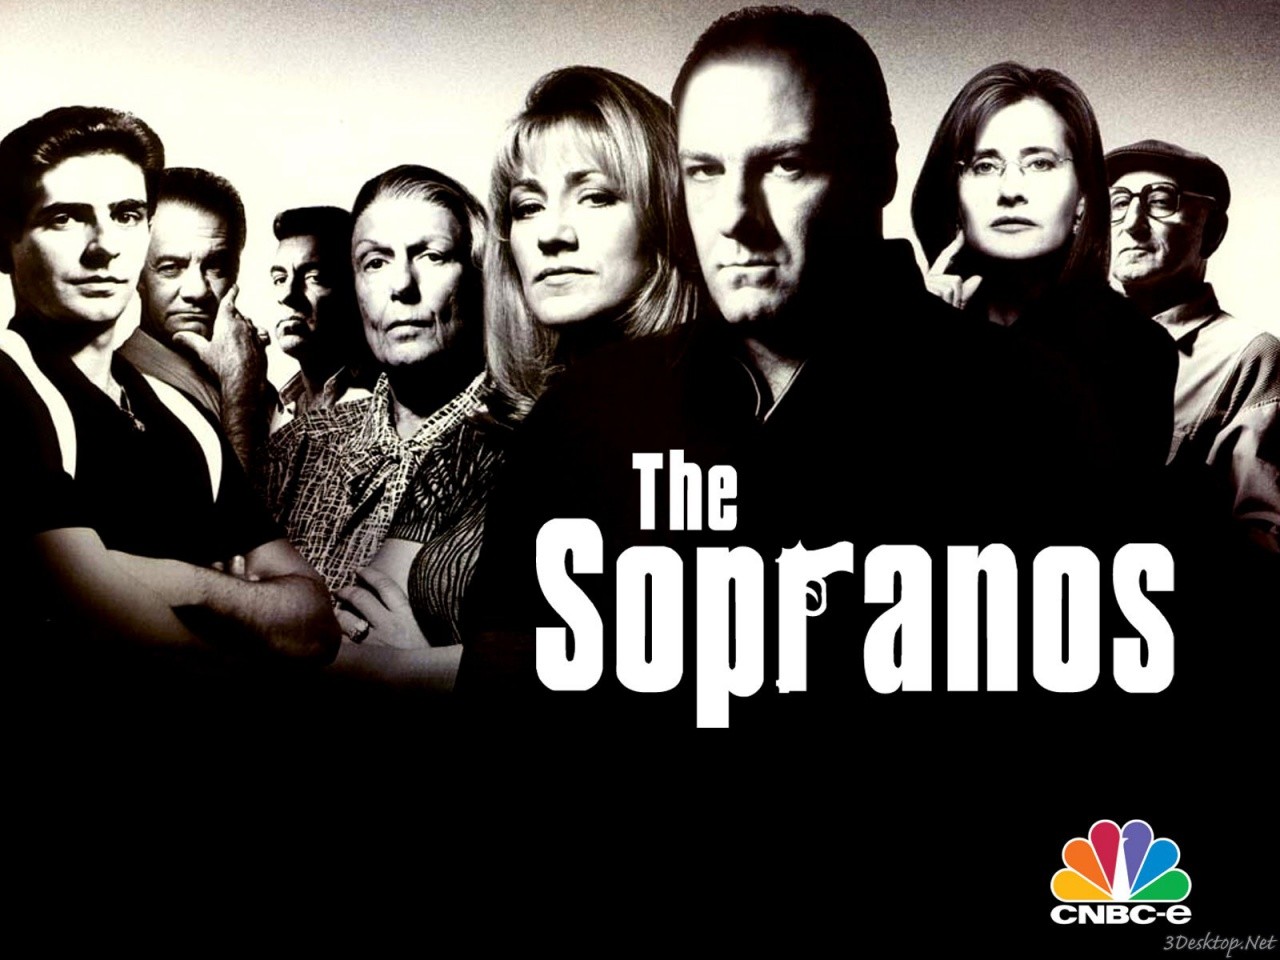 People 1280x960 The Sopranos TV series gangster crime James Gandolfini looking at viewer CNBC promotional